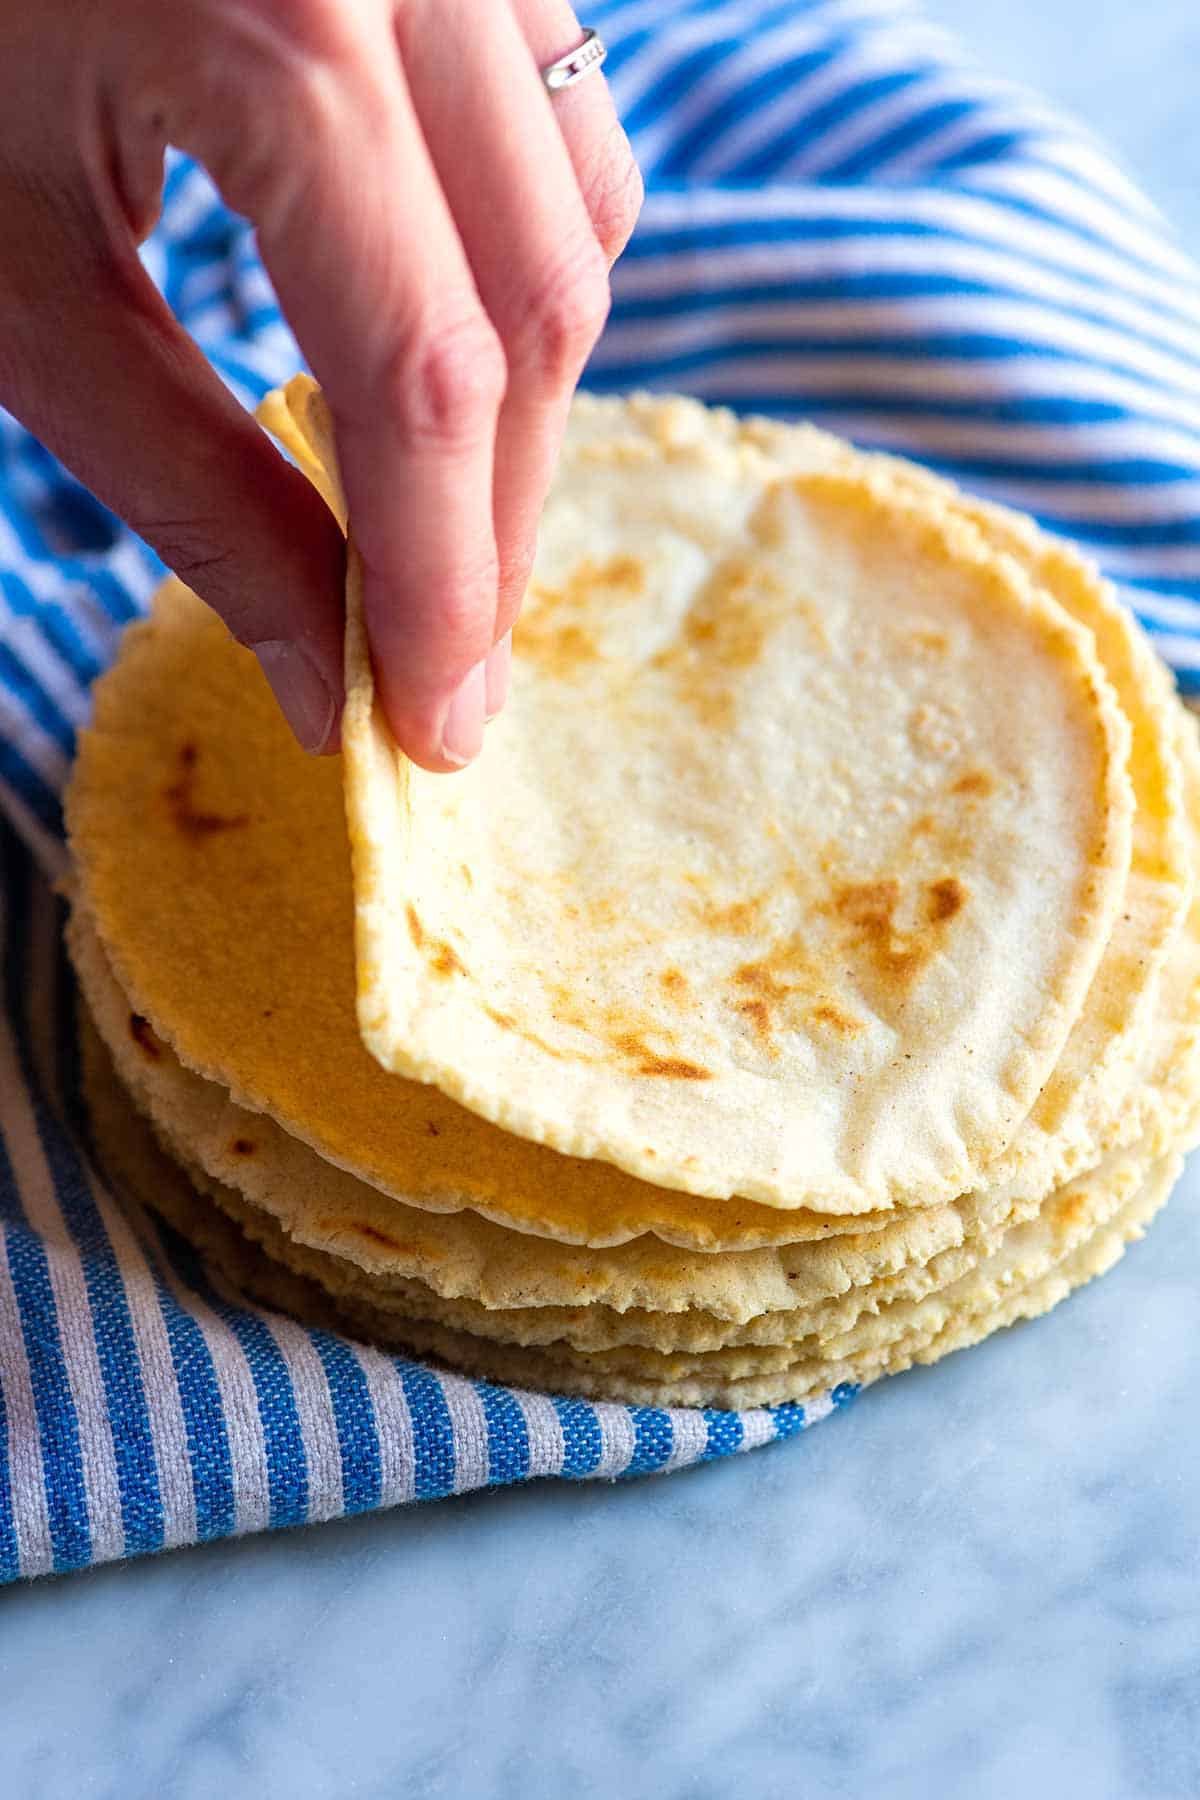 Taking from a stack of freshly made corn tortillas